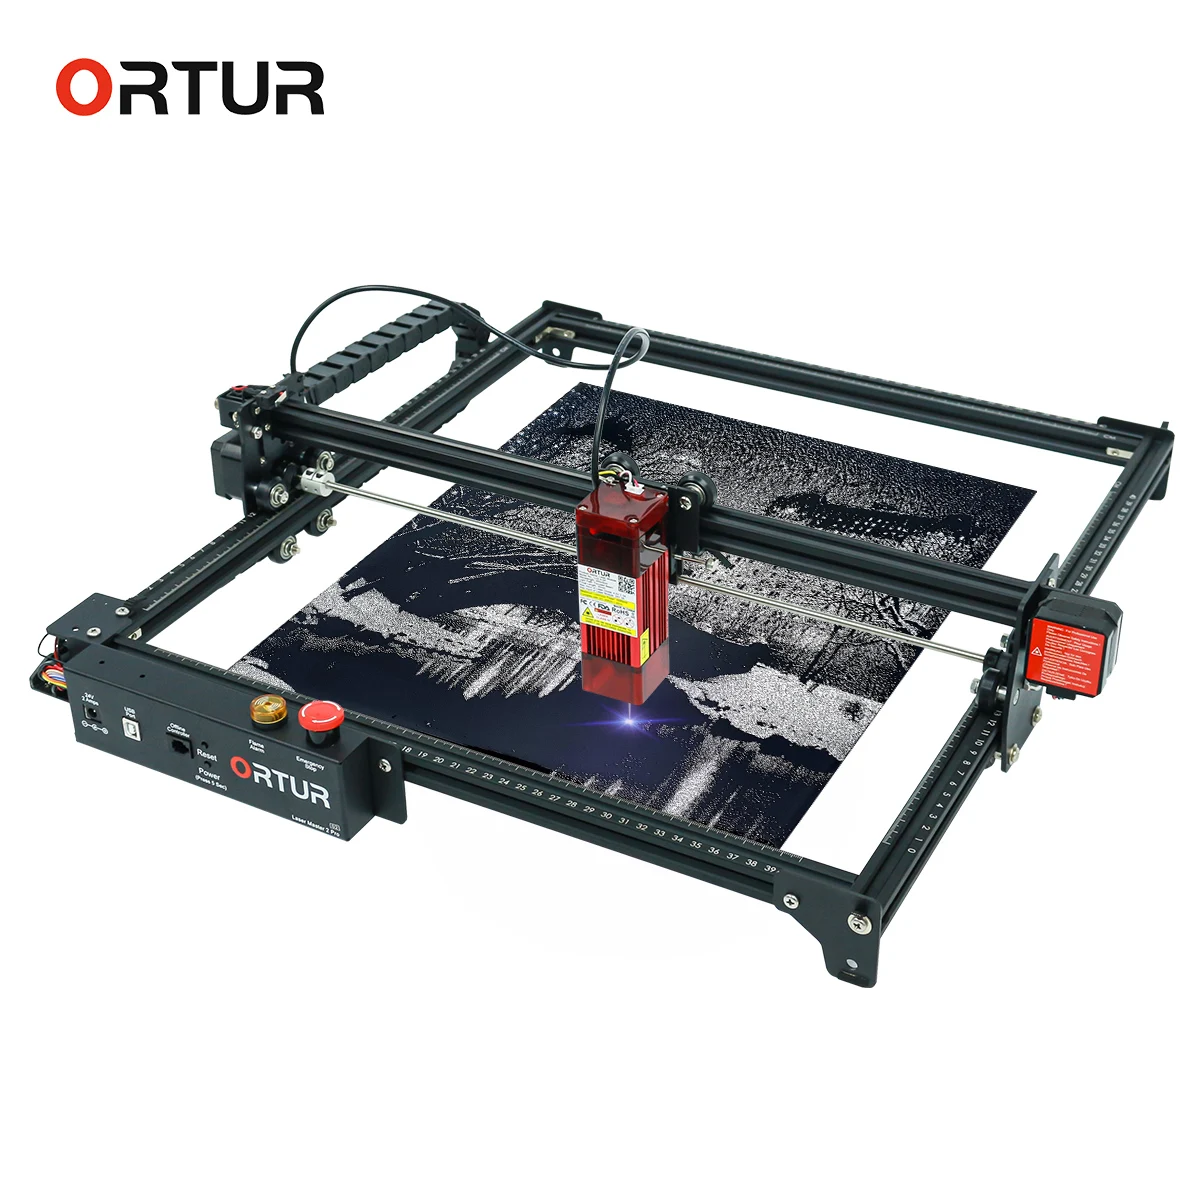 

Ortur Laser Master 2 Pro S2 Cnc Router Grbl Diy Use Stainless Steel Engraving Wood Graving Machine laser engraver